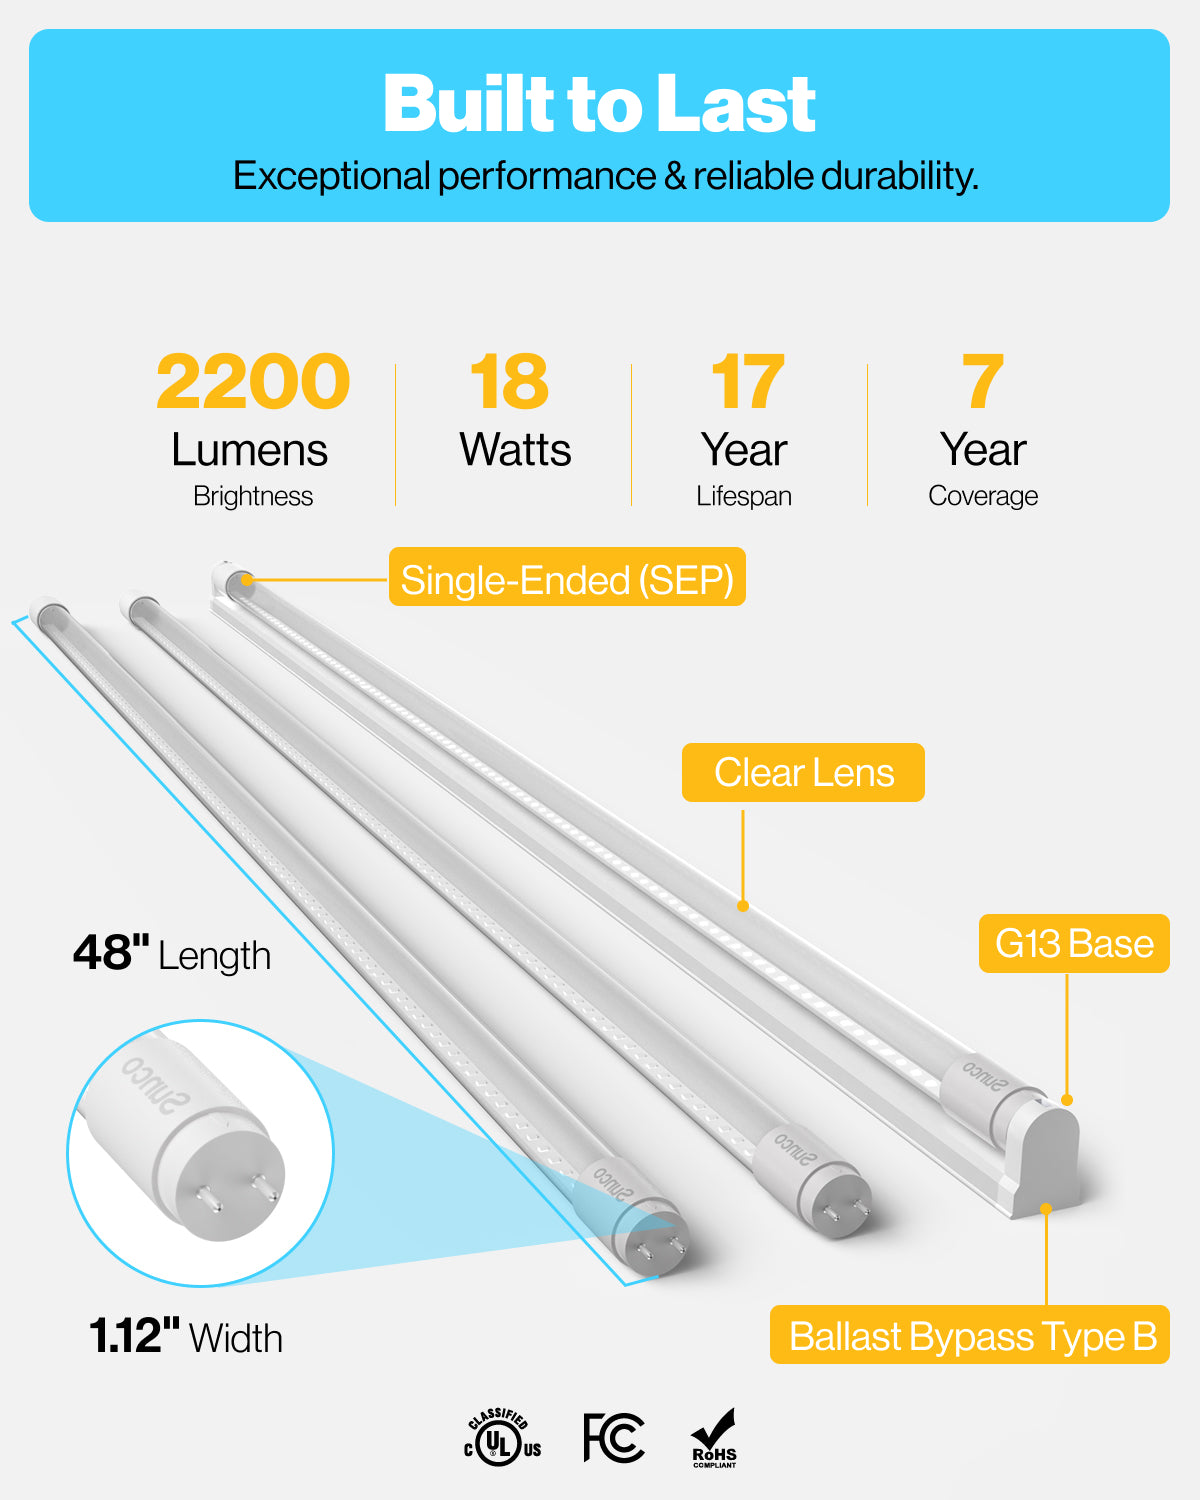 LED T5 Tubes - Type A/Type B/Type C T5 Fluorescent Replacements